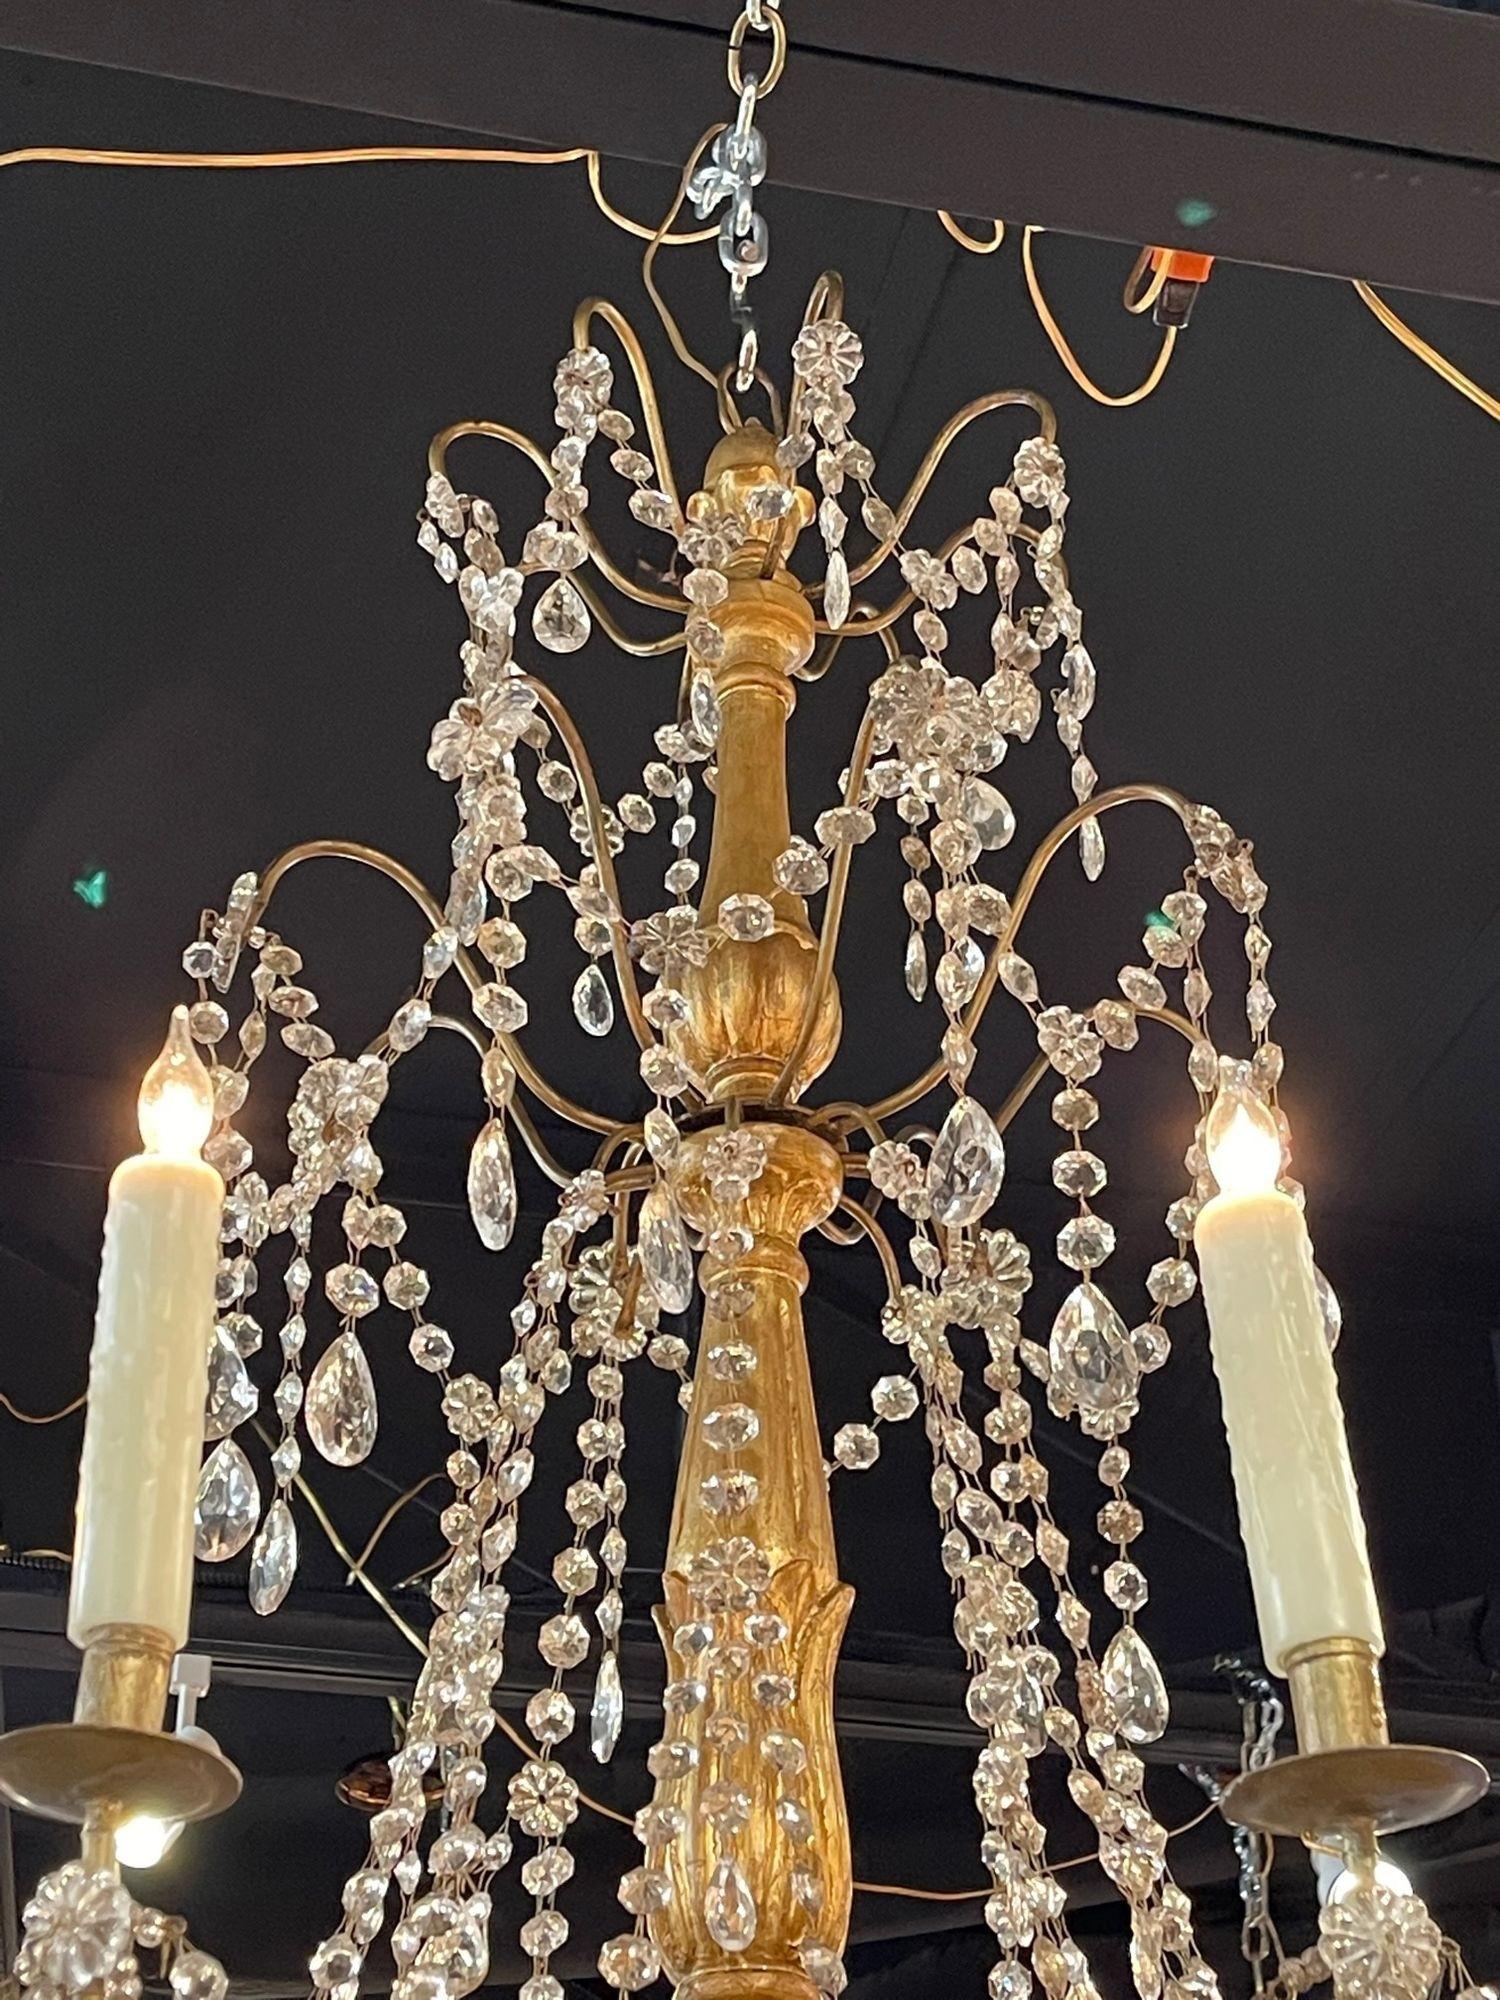 Pair of 19th Century Italian Giltwood and Crystal Chandeliers For Sale 5